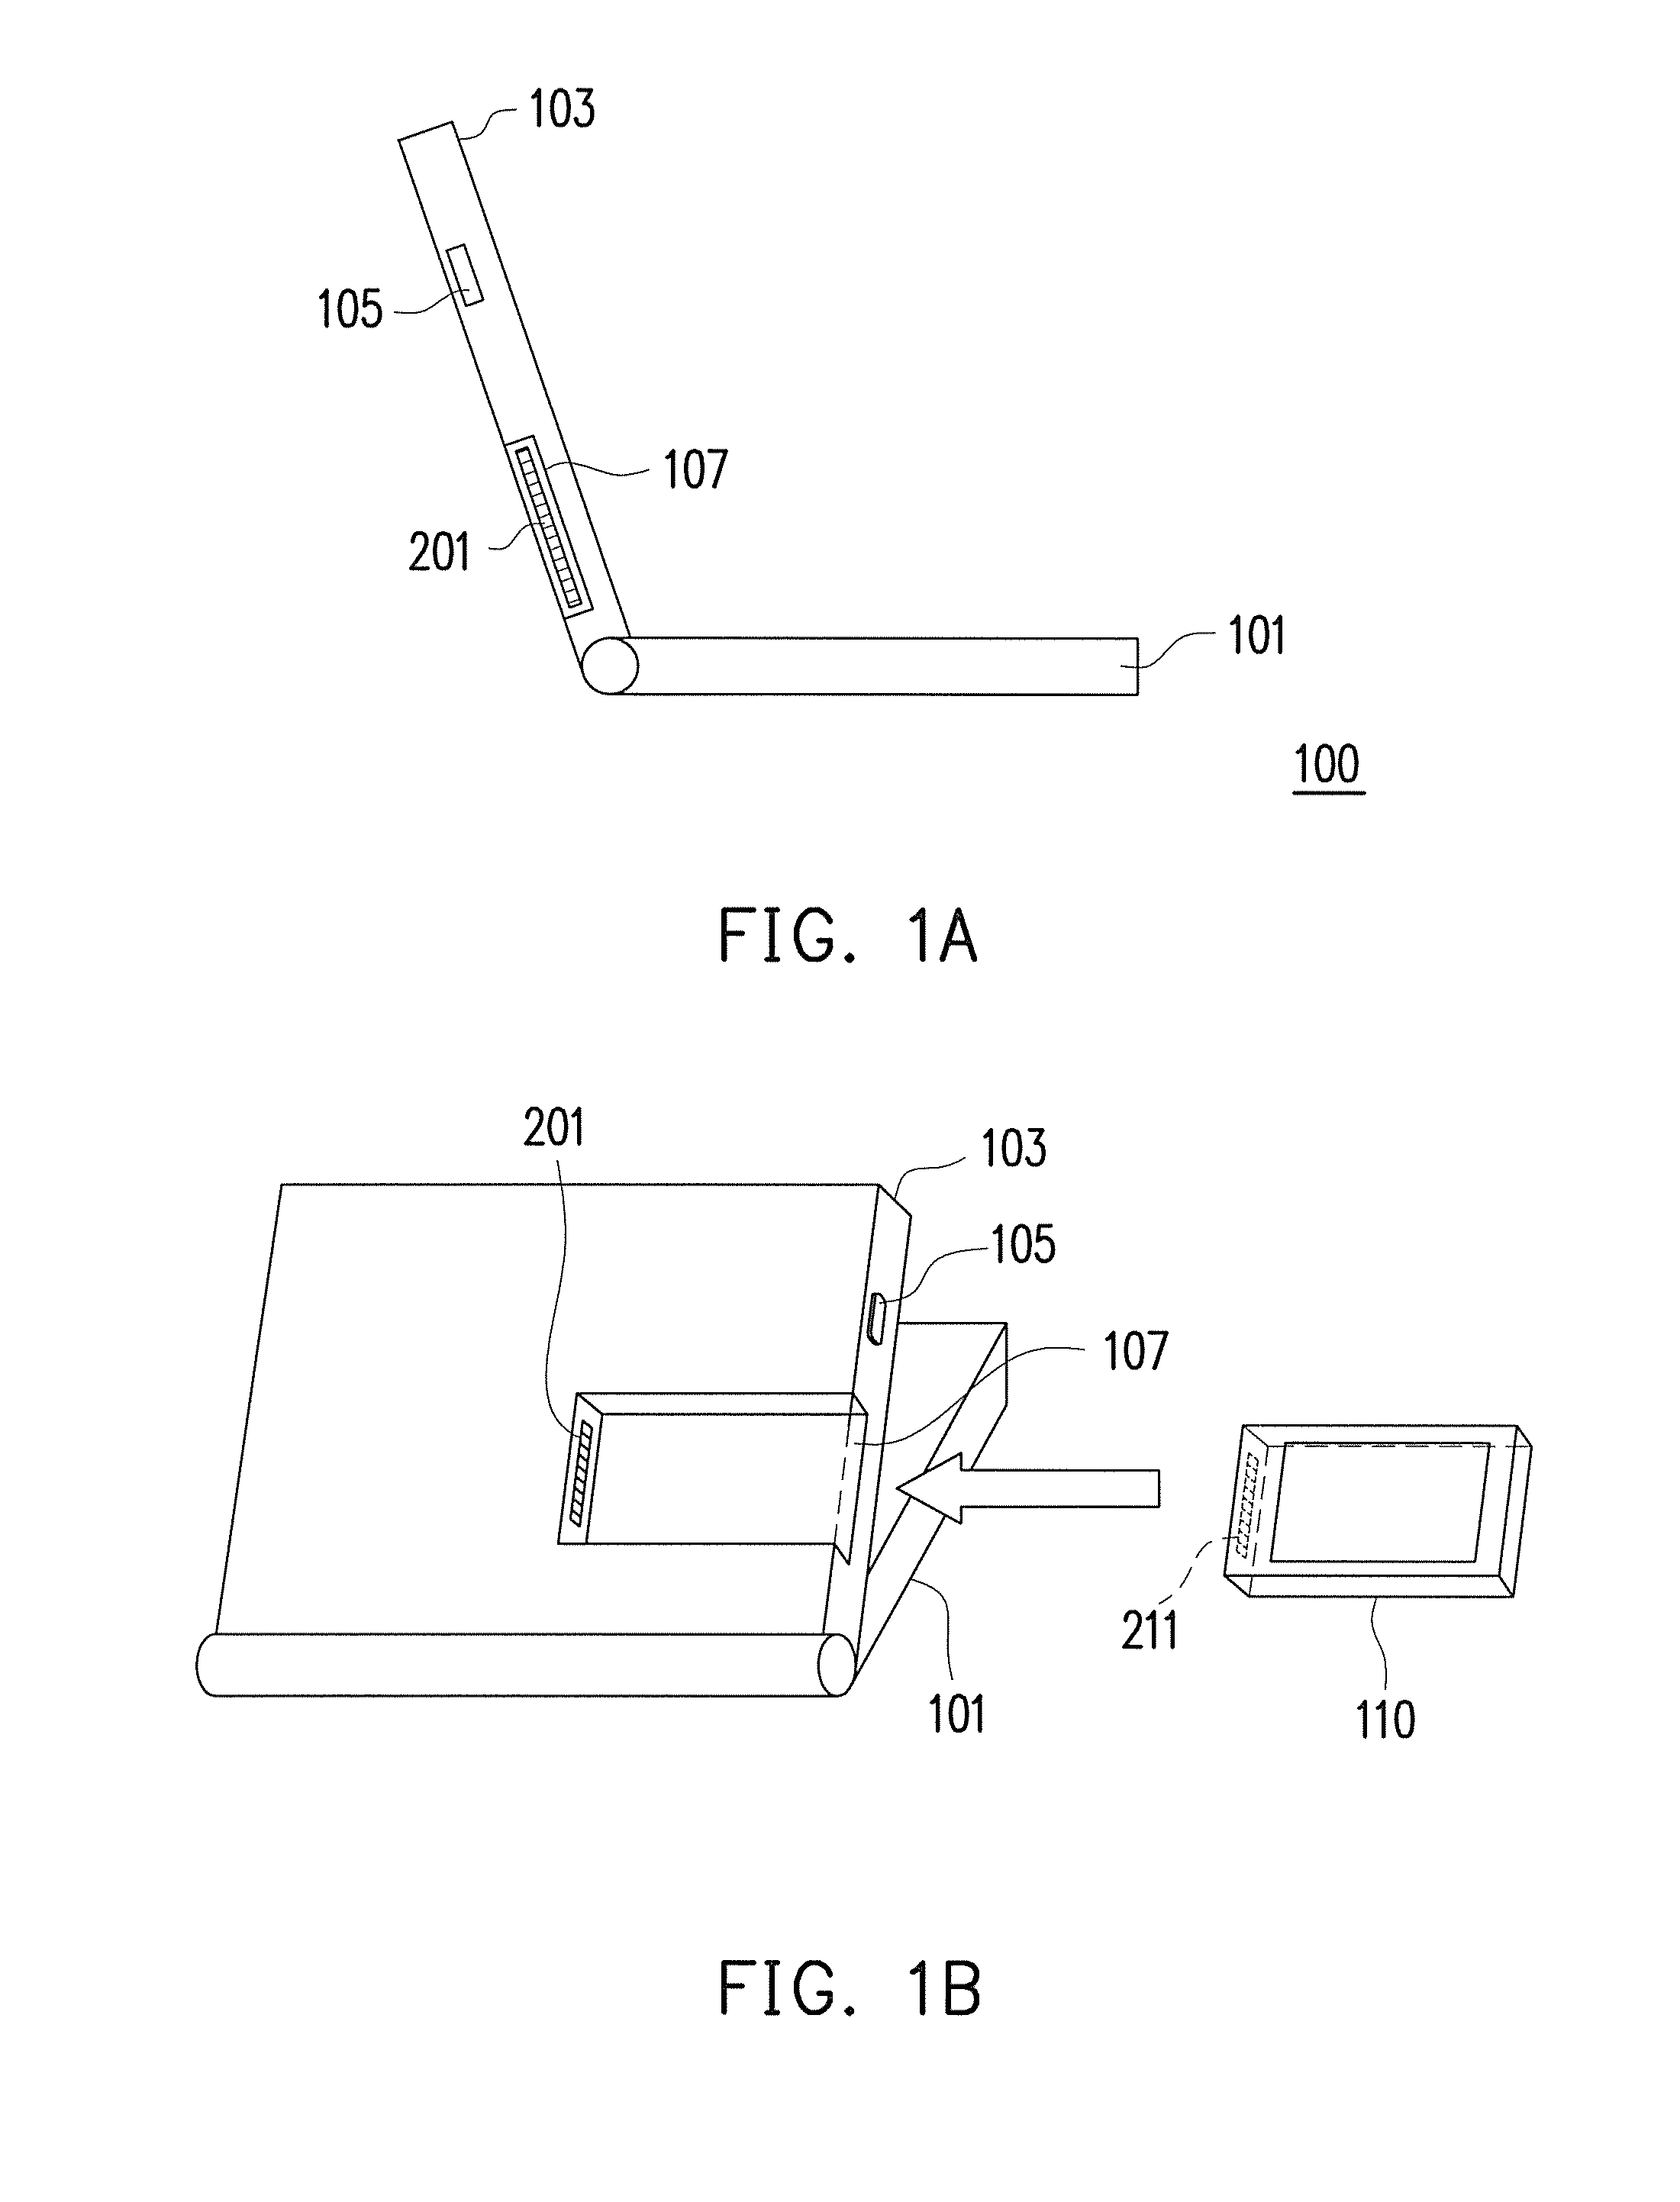 Electronic system and method of switching operating systems thereof